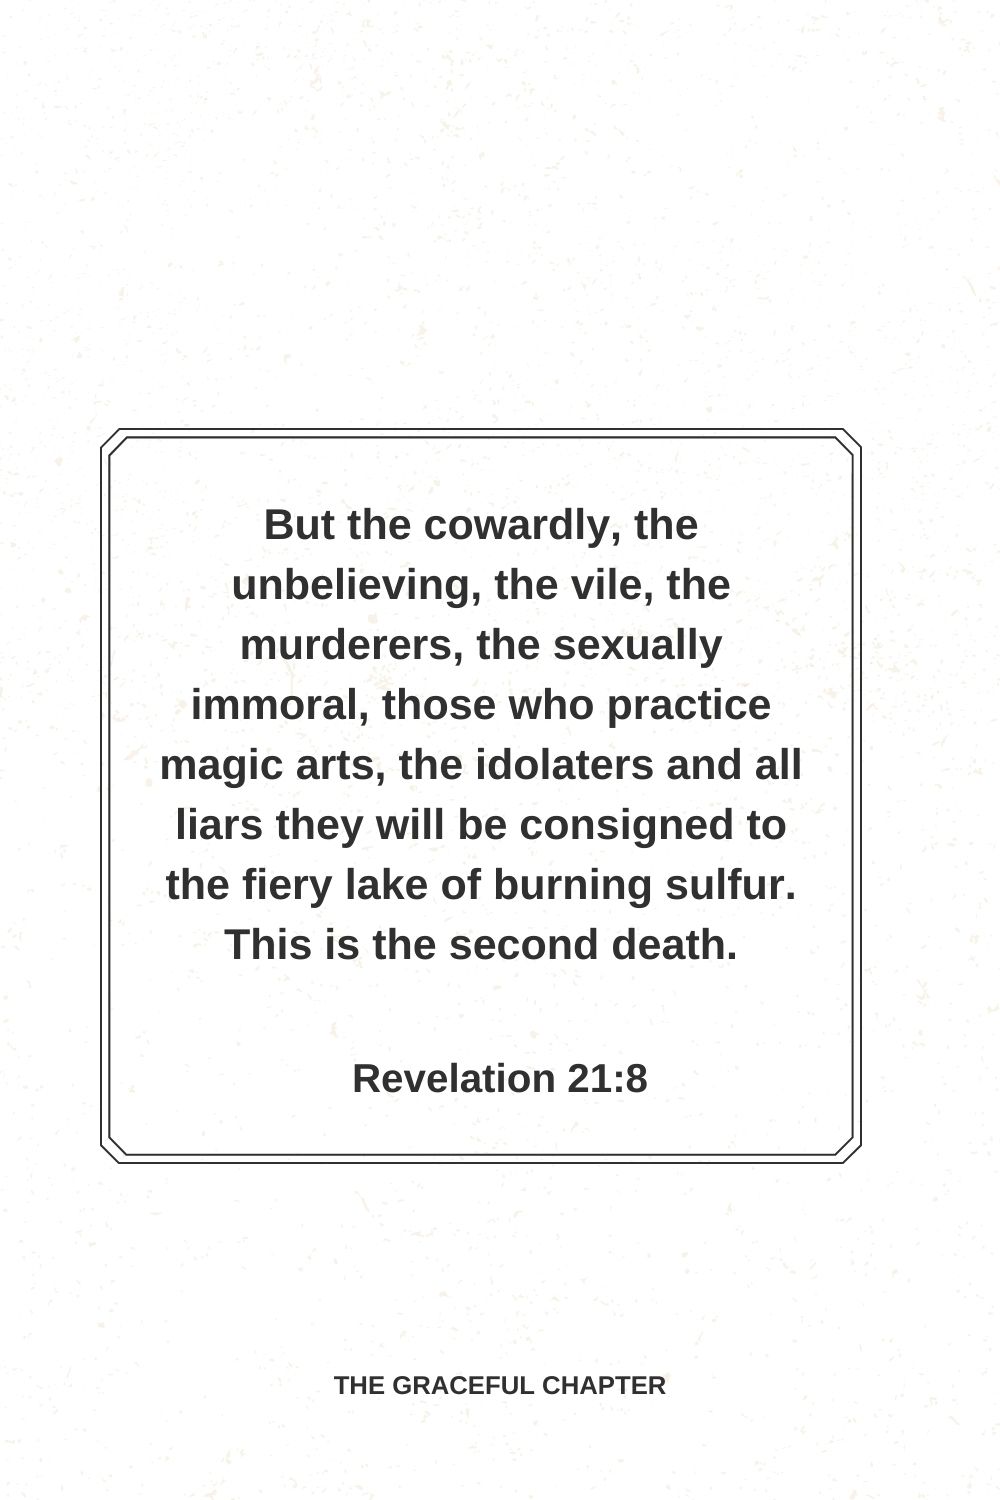 But the cowardly, the unbelieving, the vile, the murderers, the sexually immoral, those who practice magic arts, the idolaters and all liars they will be consigned to the fiery lake of burning sulfur. This is the second death. Revelation 21:8